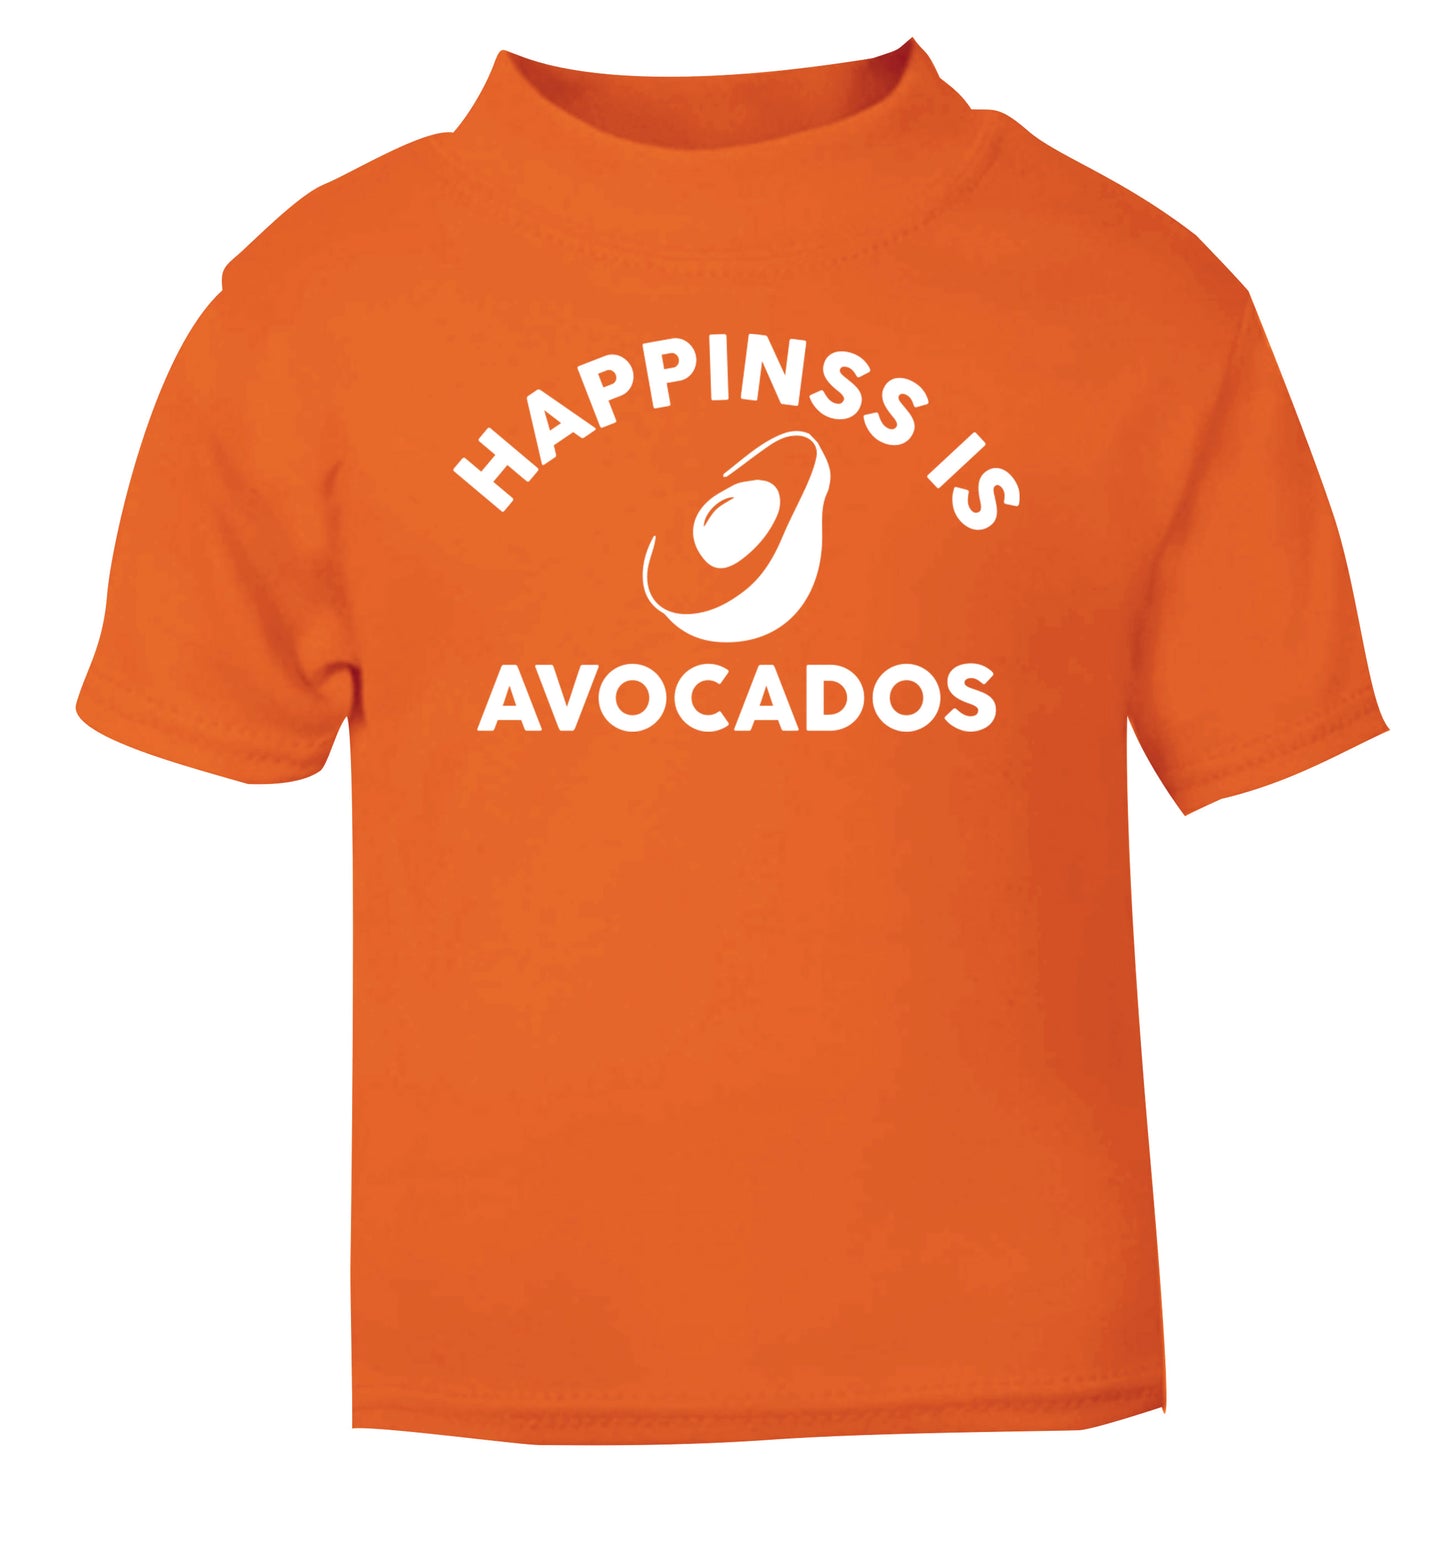 Happiness is avocados orange Baby Toddler Tshirt 2 Years